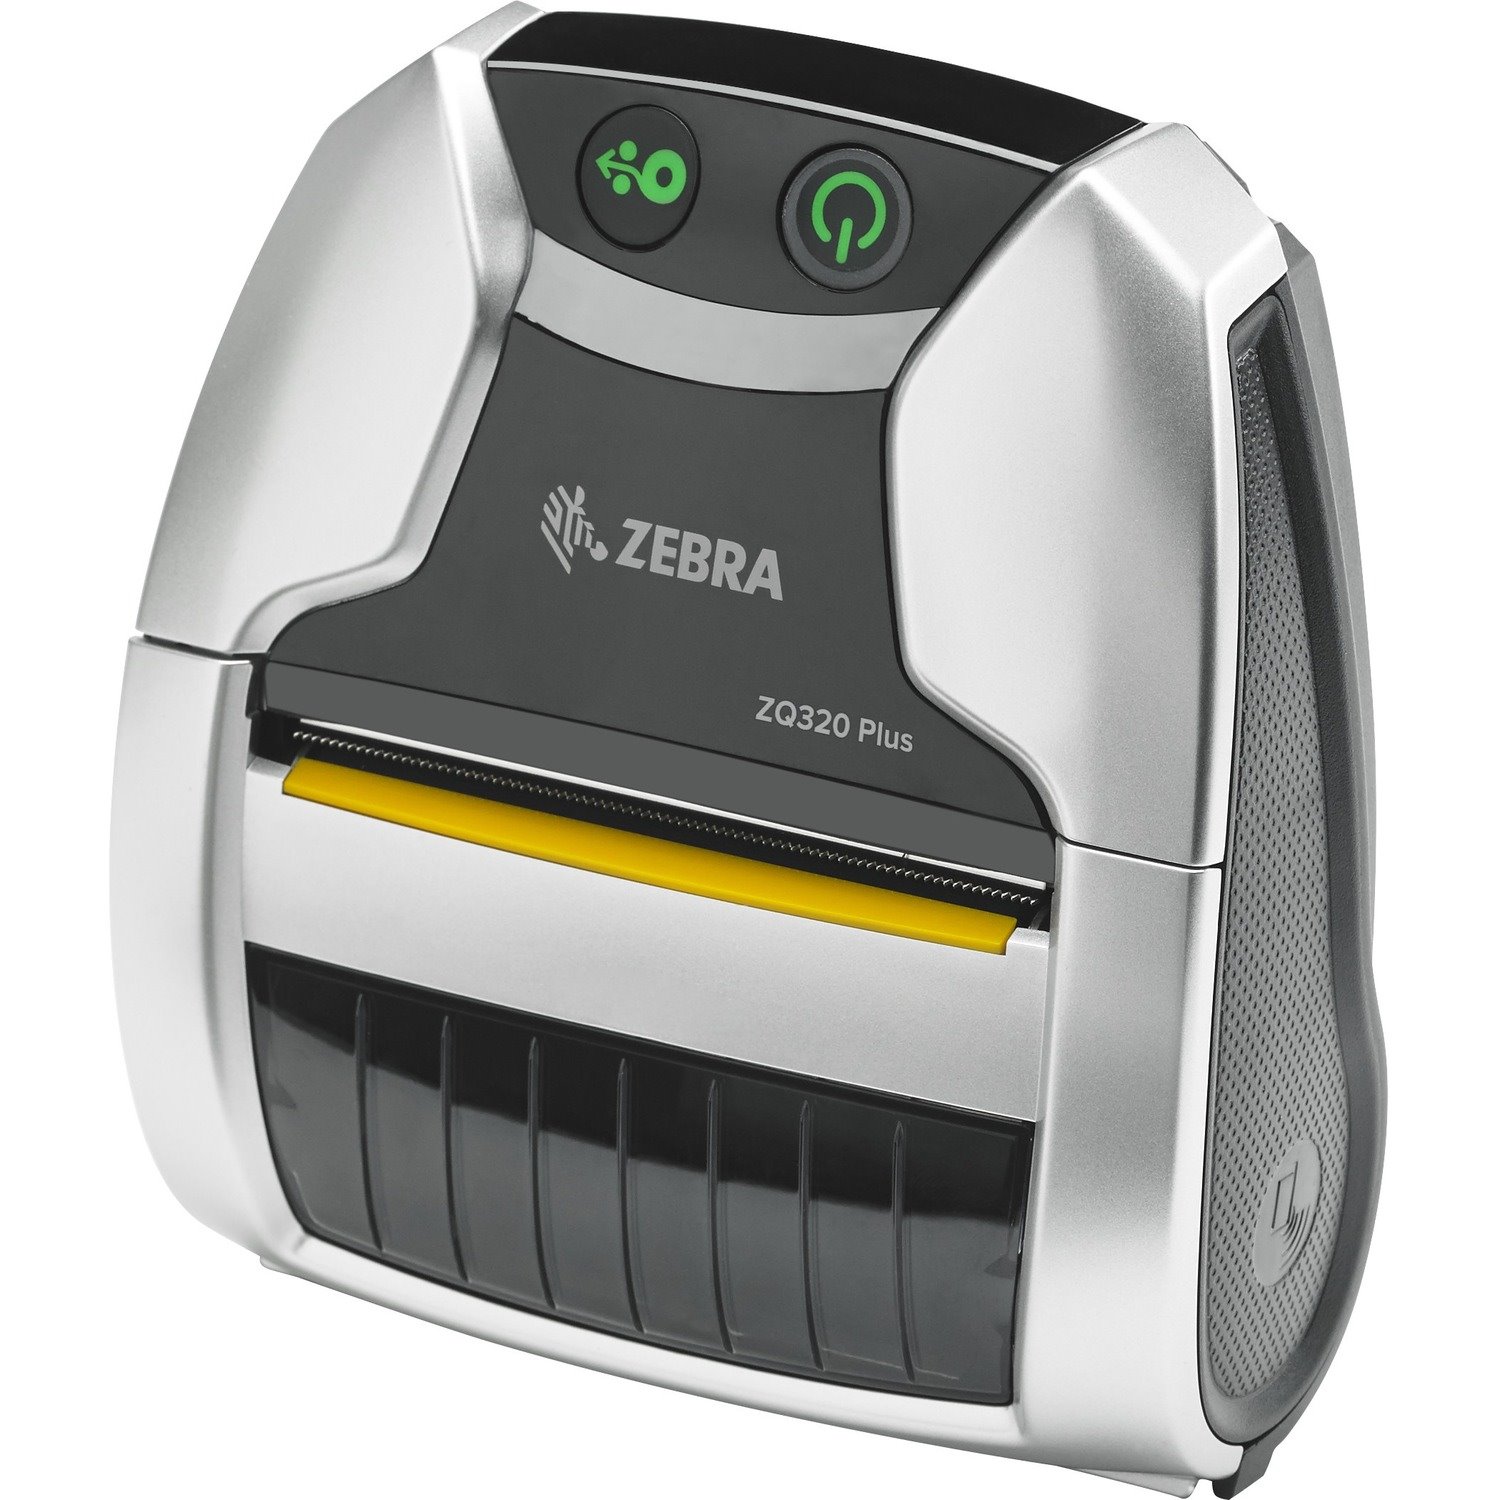 Zebra ZQ320 Plus Mobile, Industrial Direct Thermal Printer - Monochrome - Label/Receipt Print - Bluetooth - Near Field Communication (NFC) - Battery Included - With Cutter